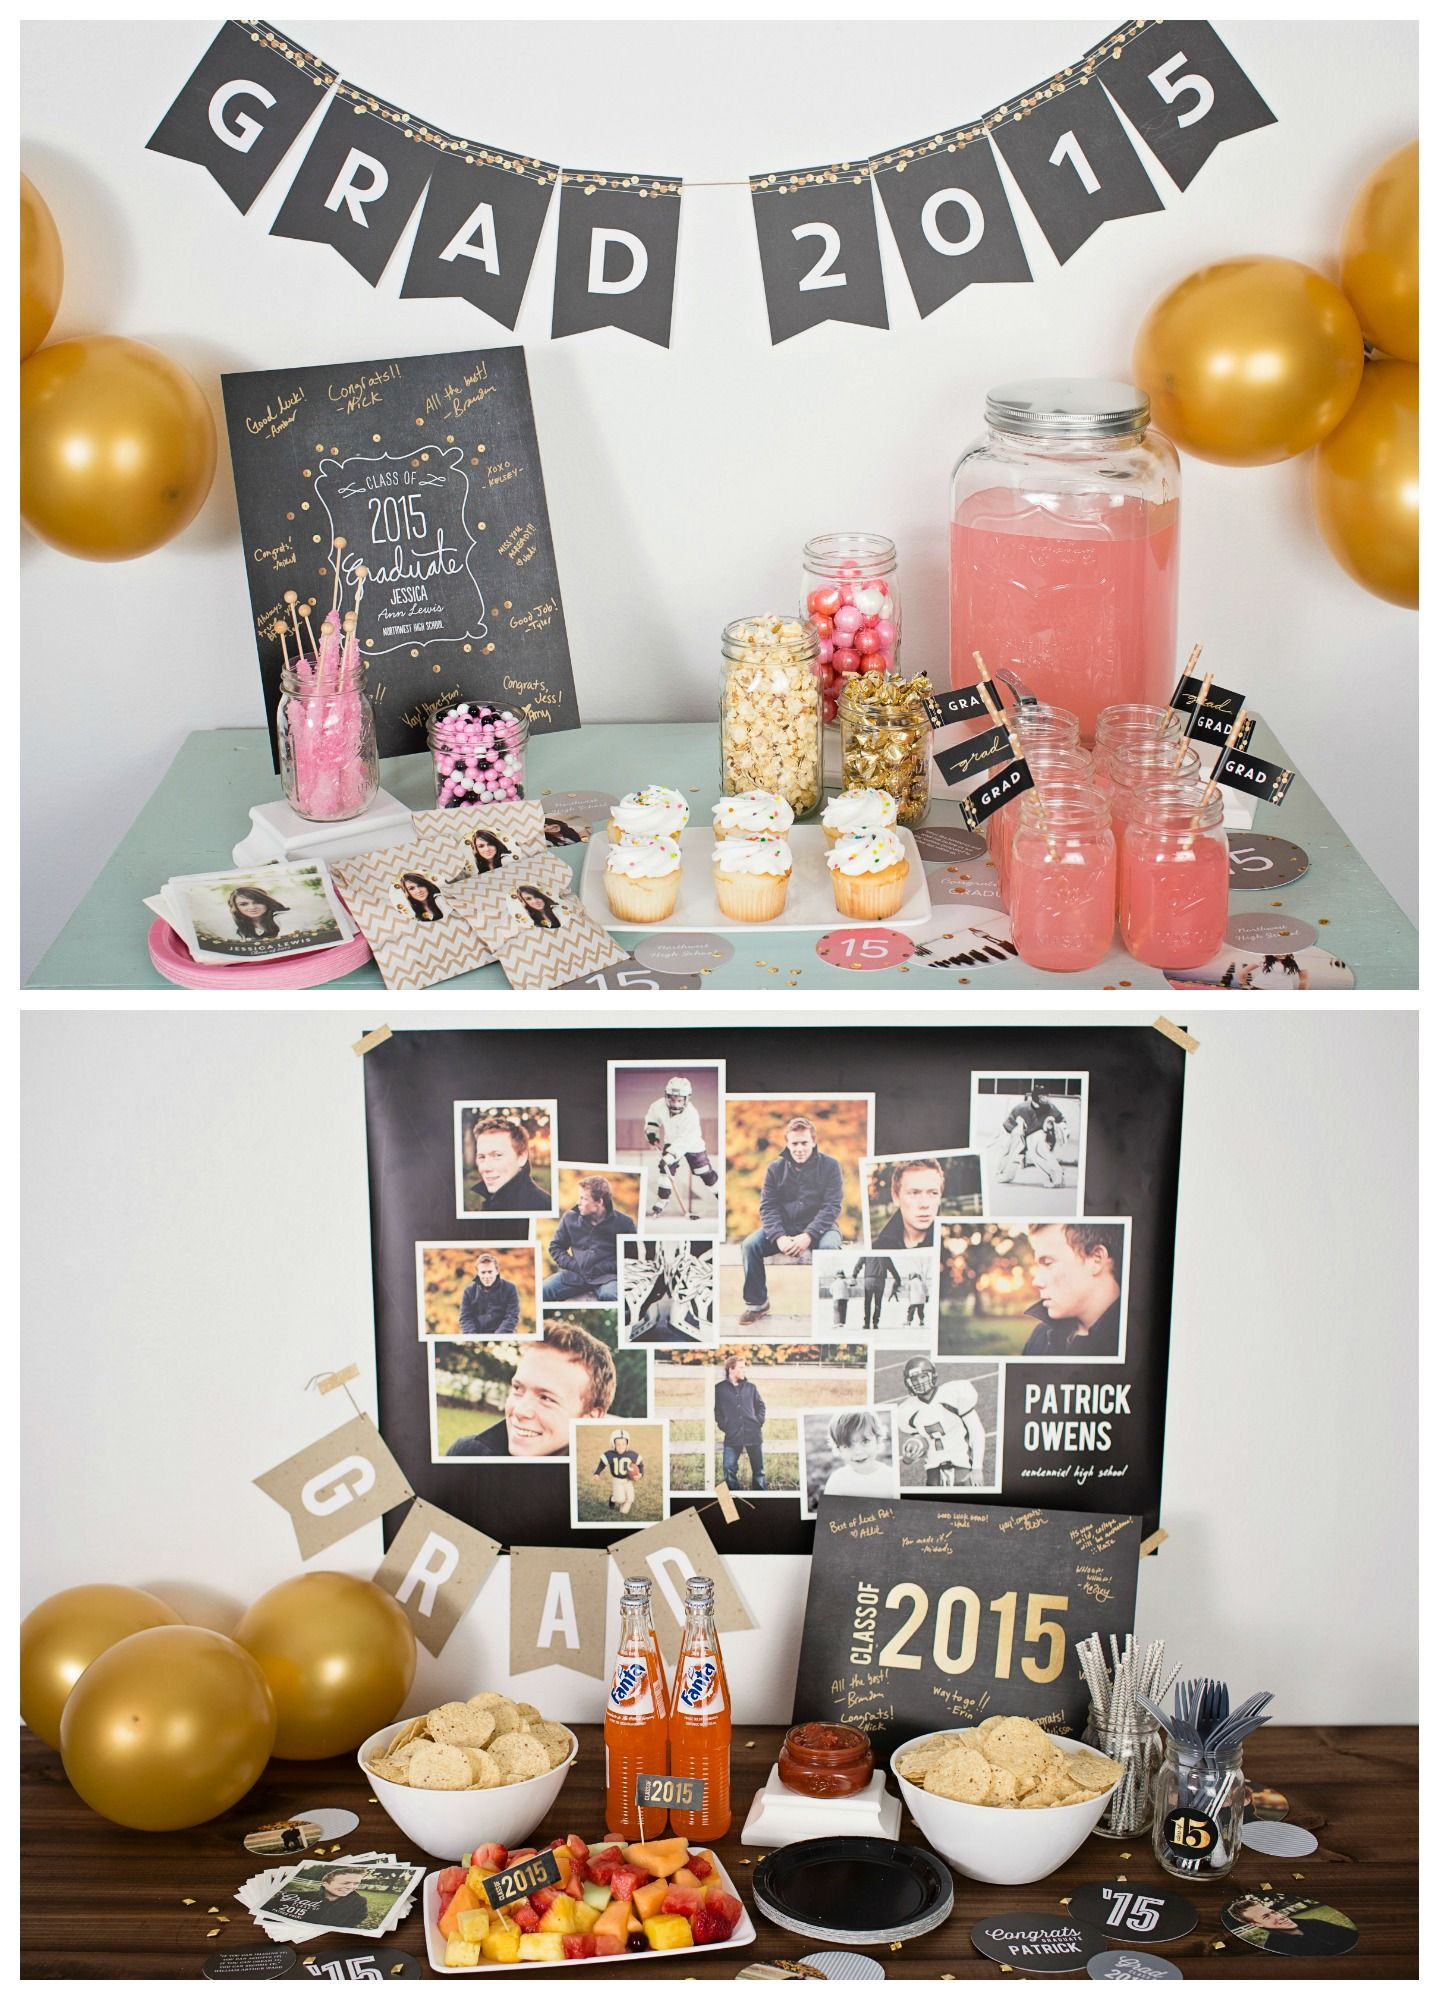 Graduation Party Gift Table Ideas
 These graduation decorating ideas will create a memorable